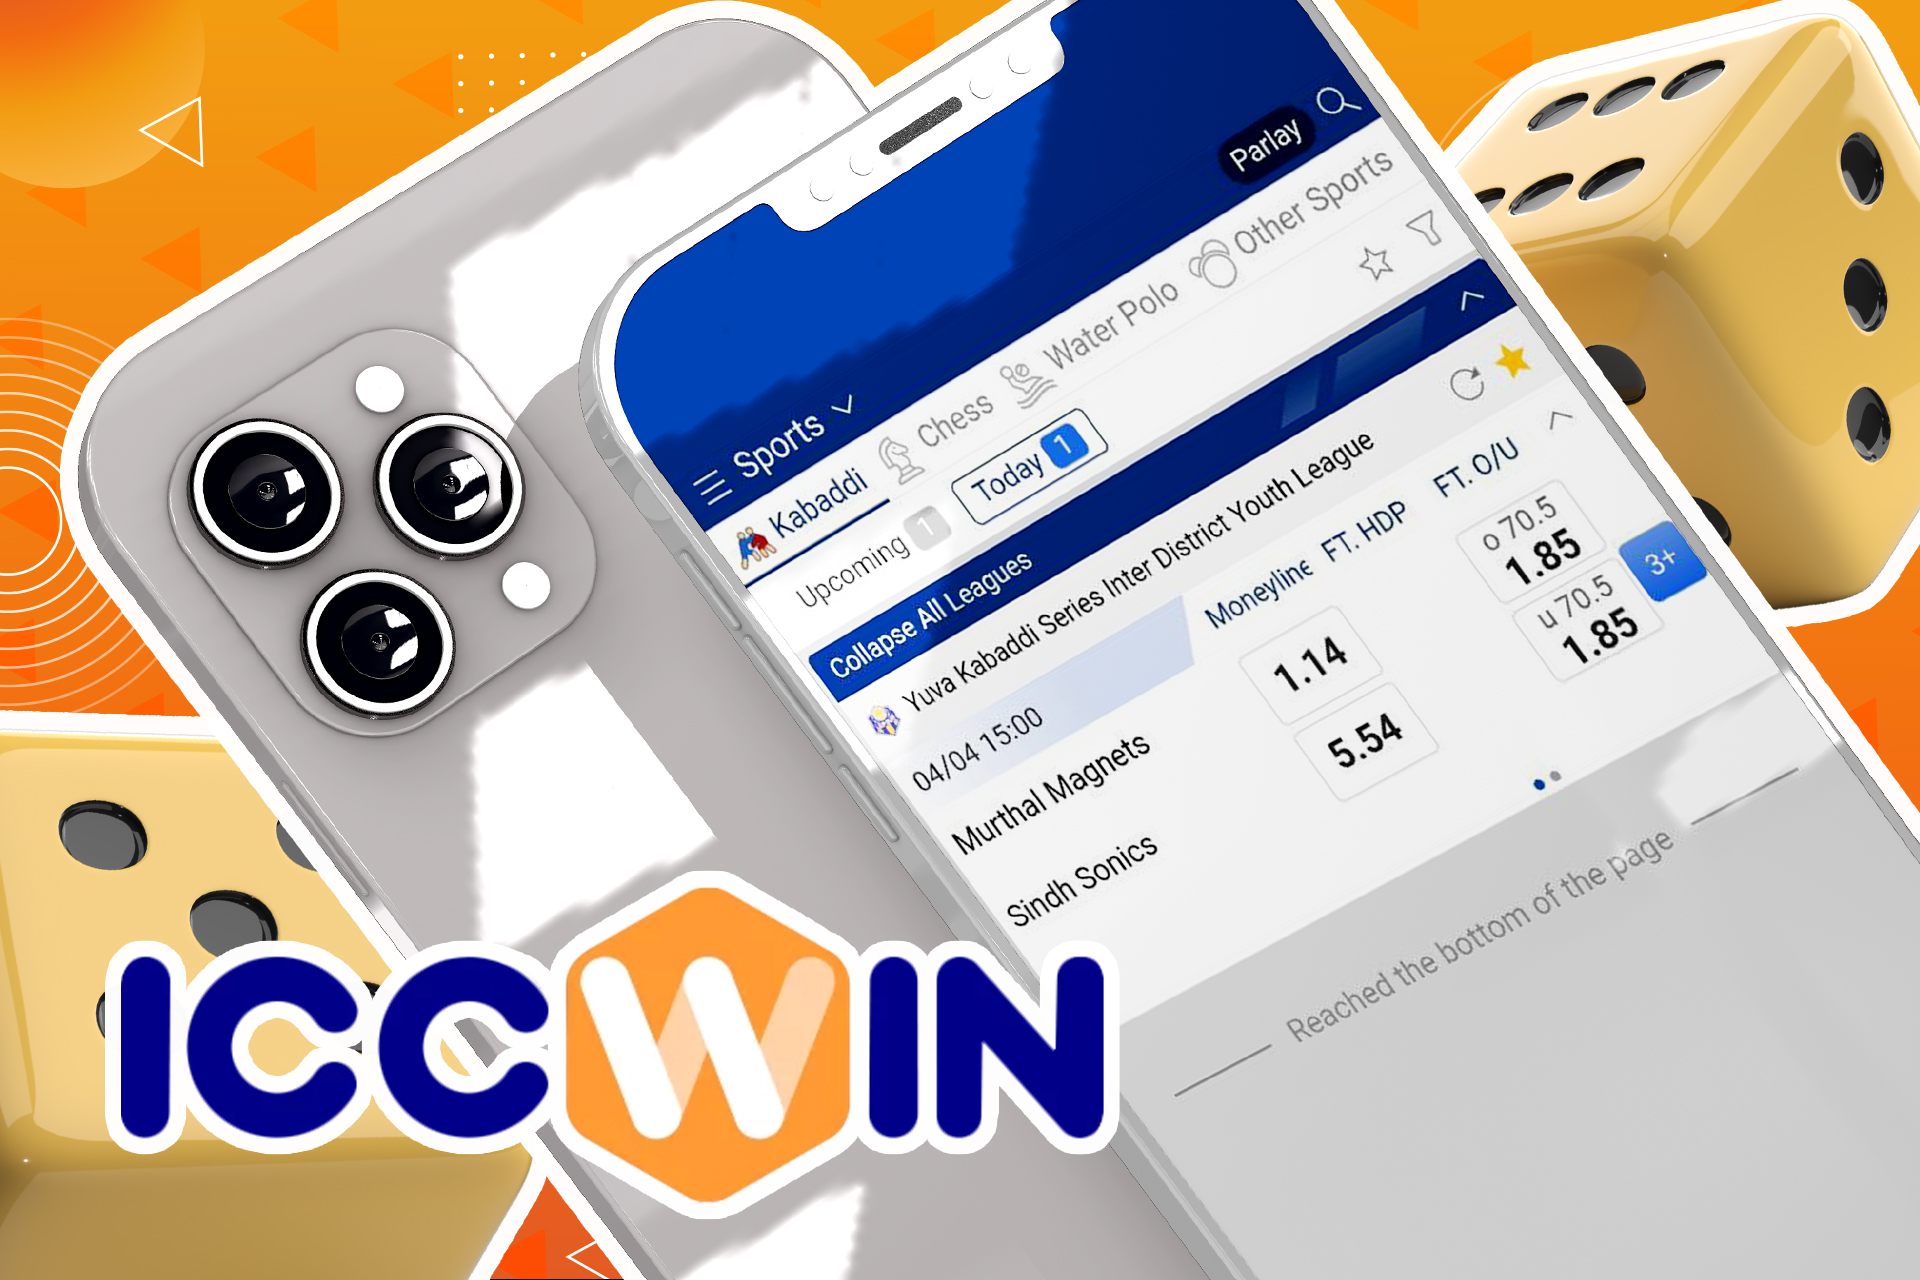 Download the ICCWIN mobile app to place bets on labaddi via your Android or iOS device.